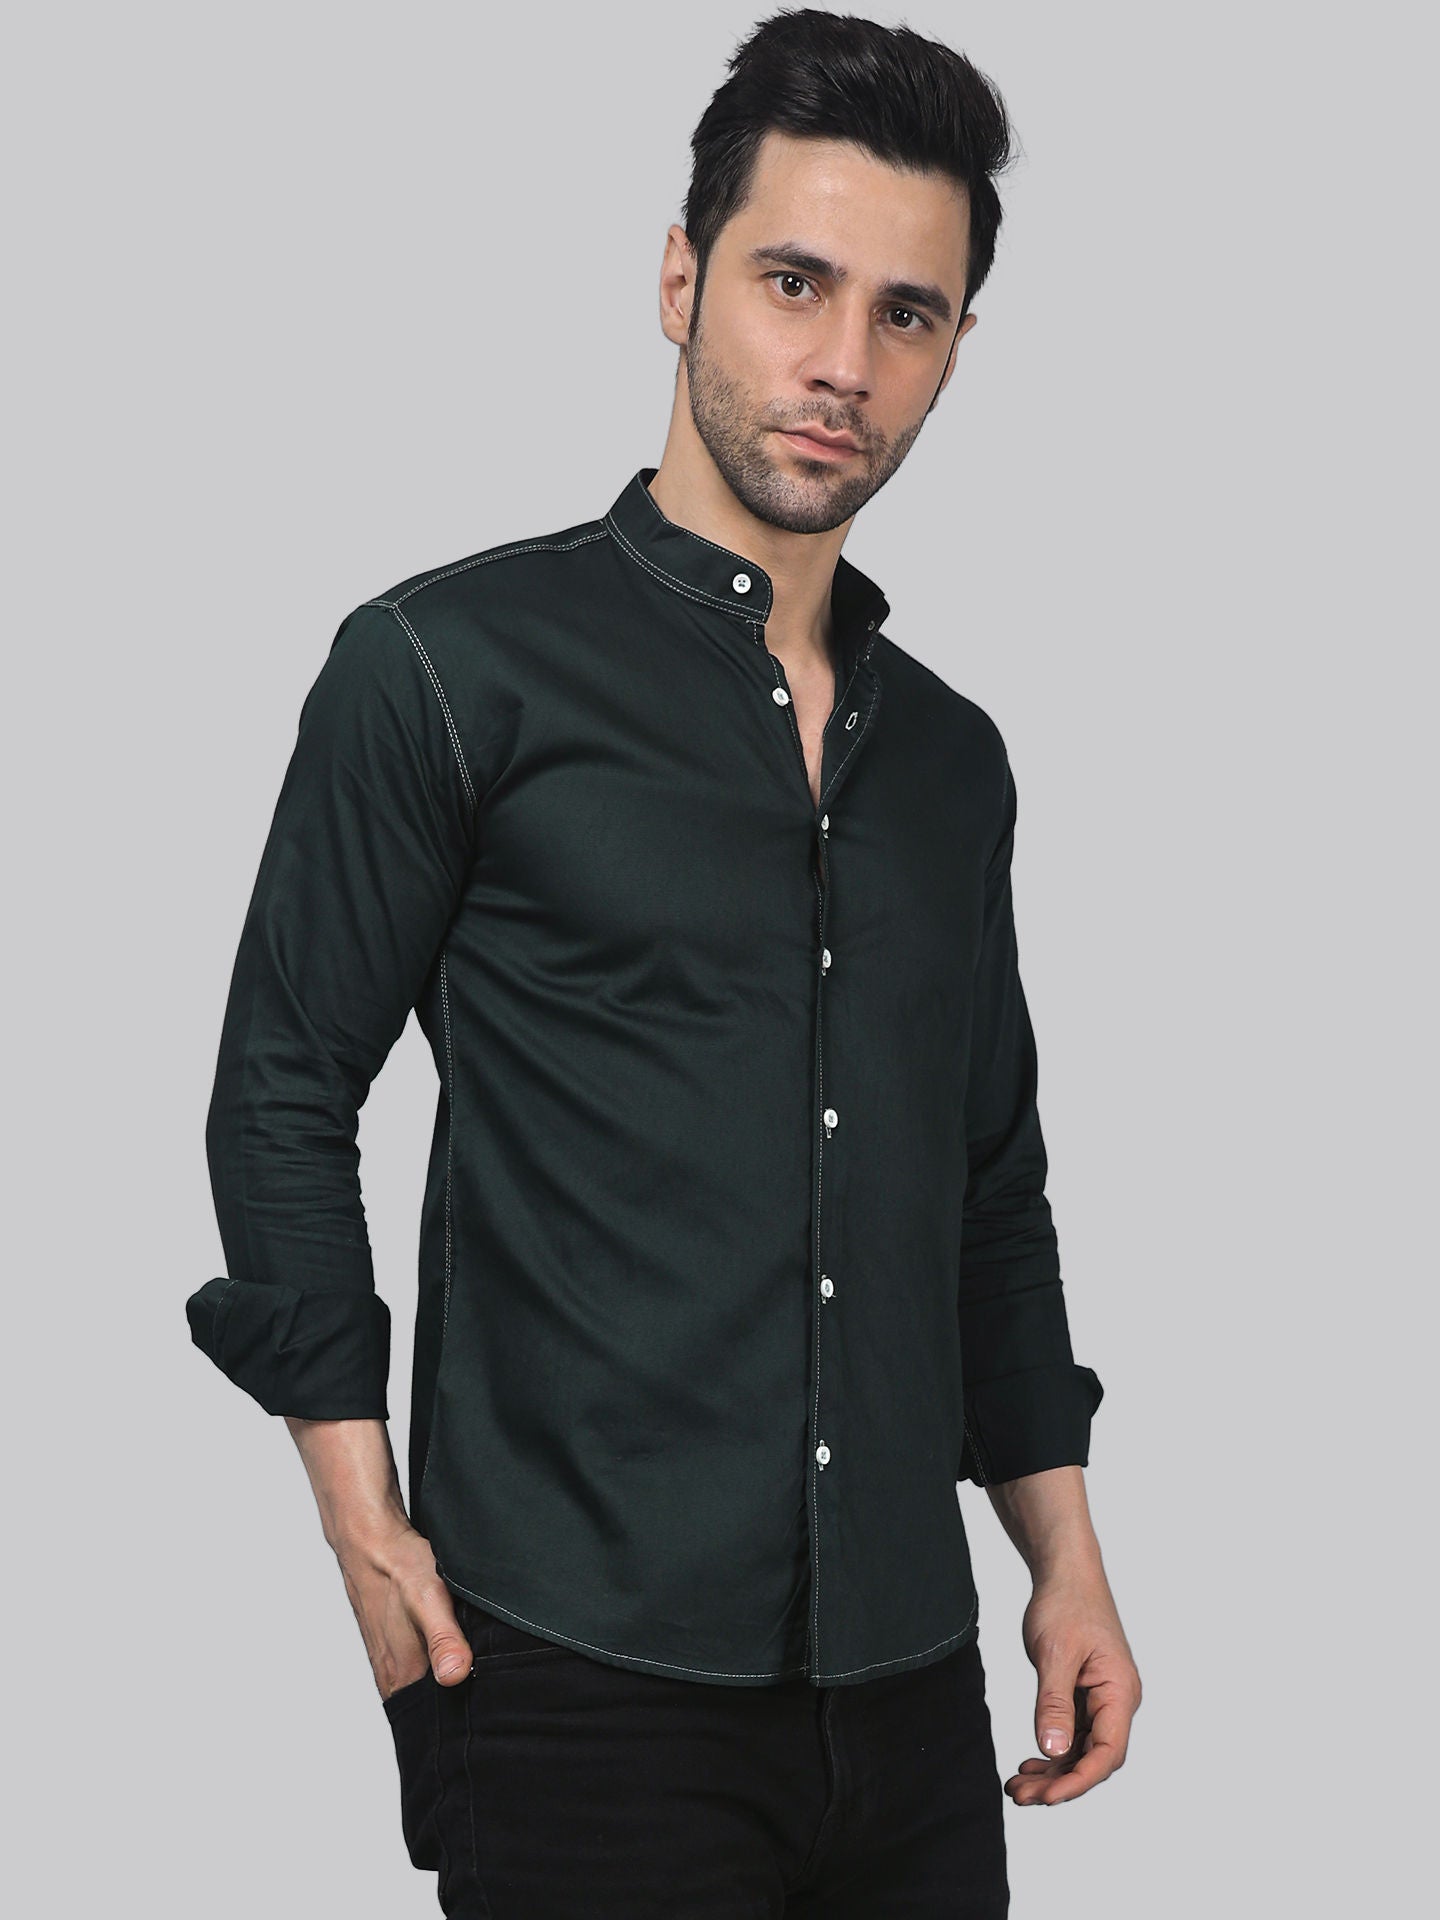 Streetwise TryBuy Premium Solid Dark Green Cotton Casual Shirt for Men - TryBuy® USA🇺🇸